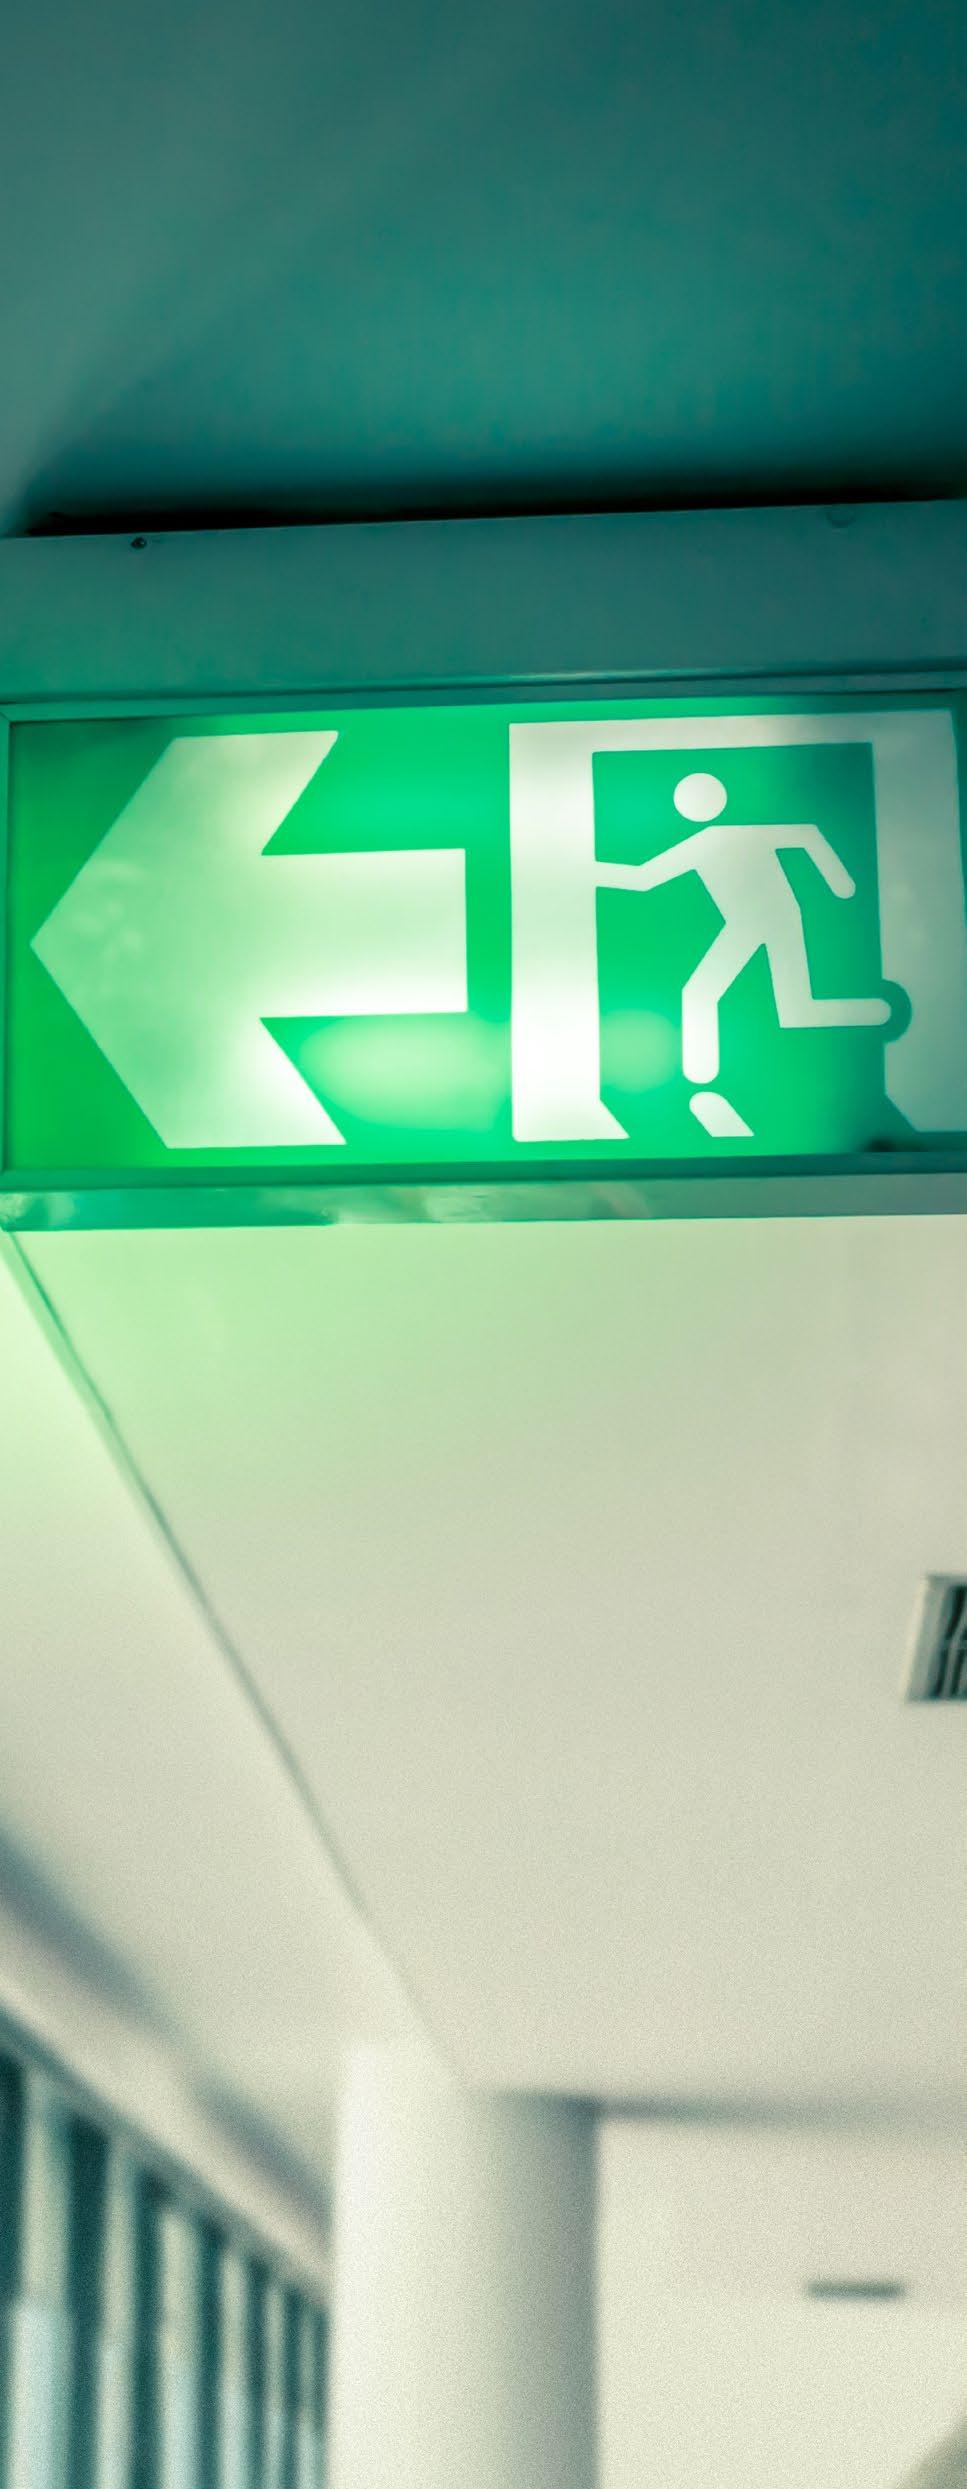 Emergency Lighting & Signage Emergency lighting can save lives by allowing people to find a safe exit out of a building when lighting has failed, such as in the event of a fire or a power cut.